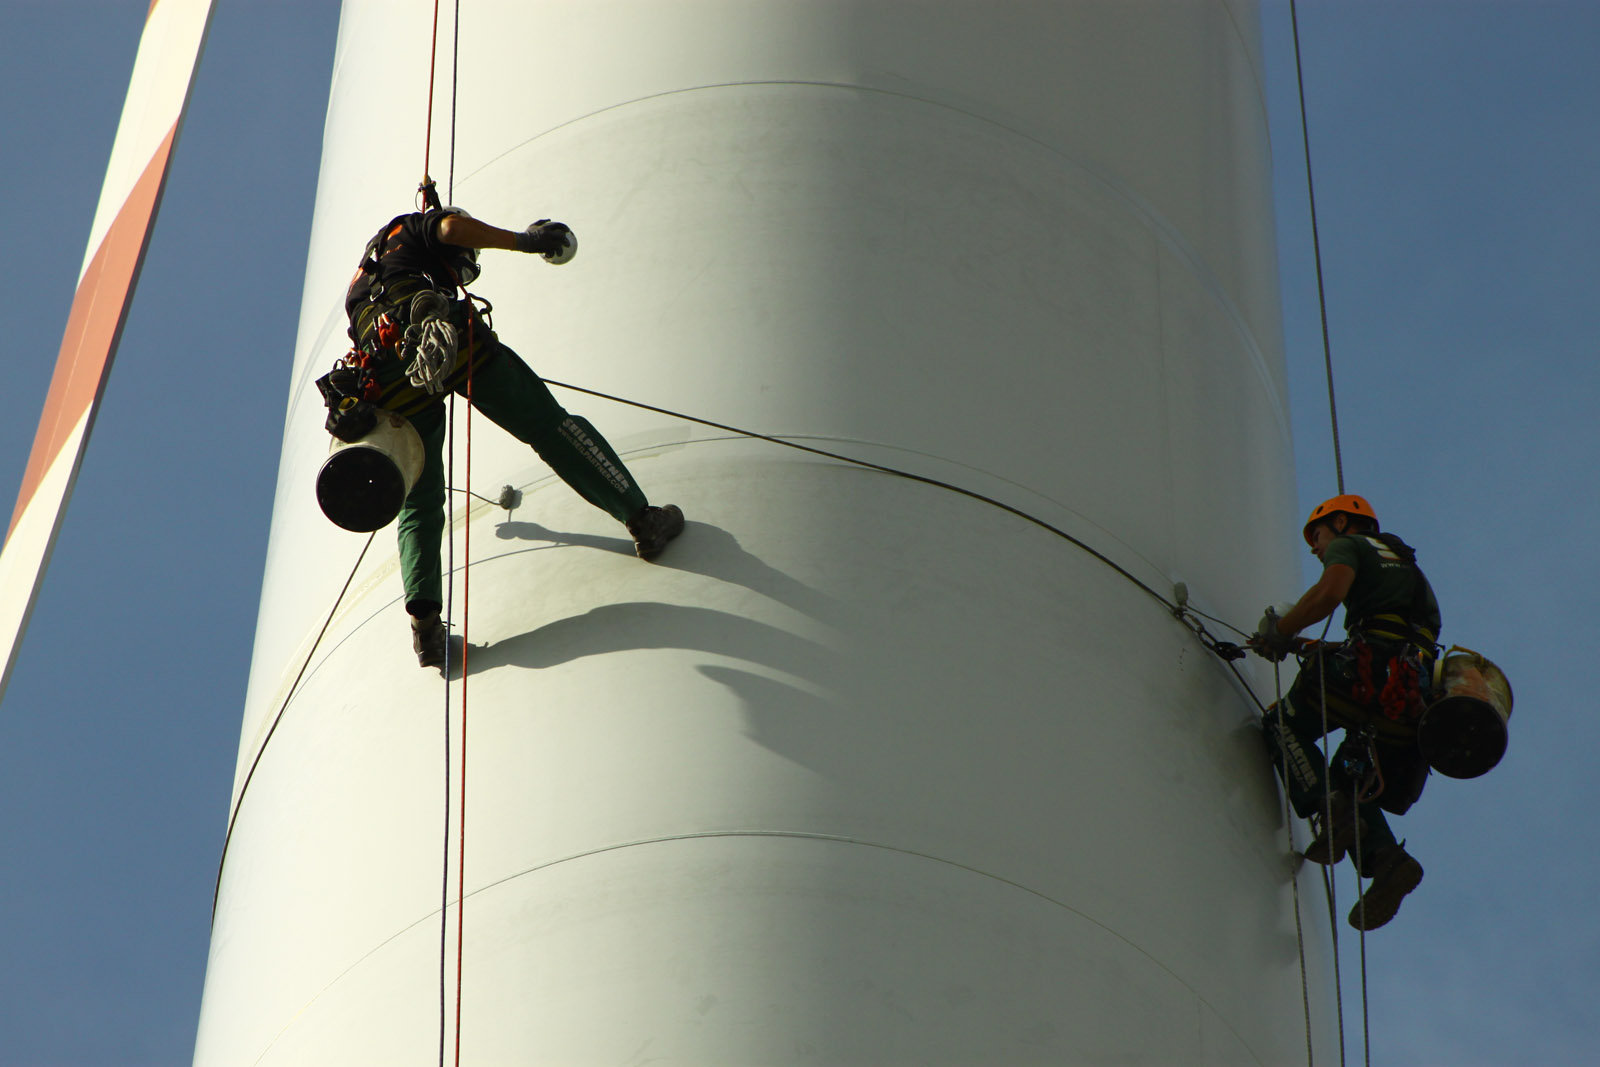 Industrial climbers abseiling down a rotor blade.